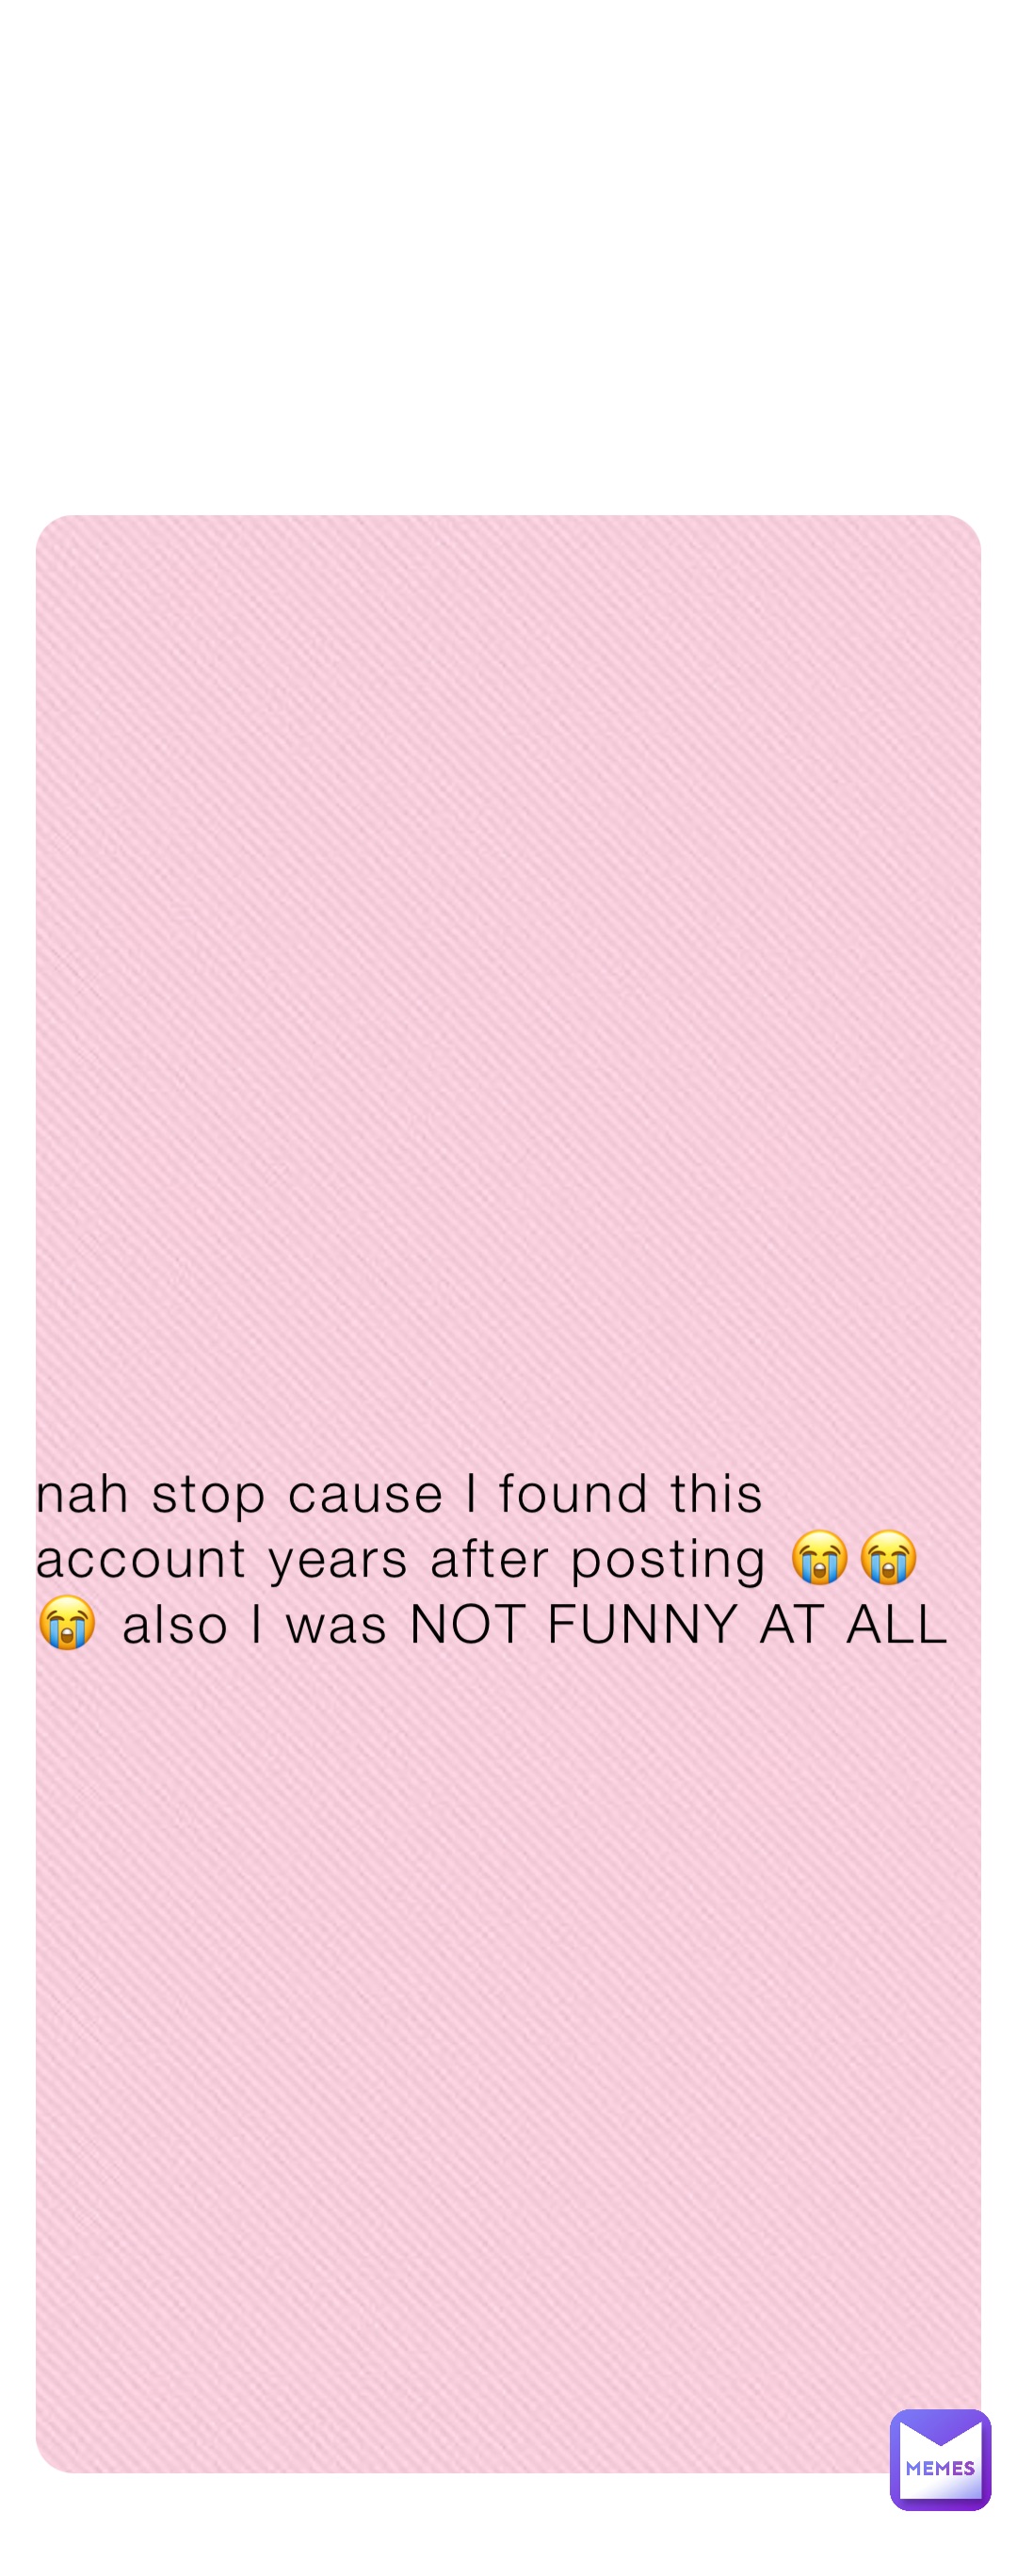 nah stop cause I found this account years after posting 😭😭😭 also I was NOT FUNNY AT ALL